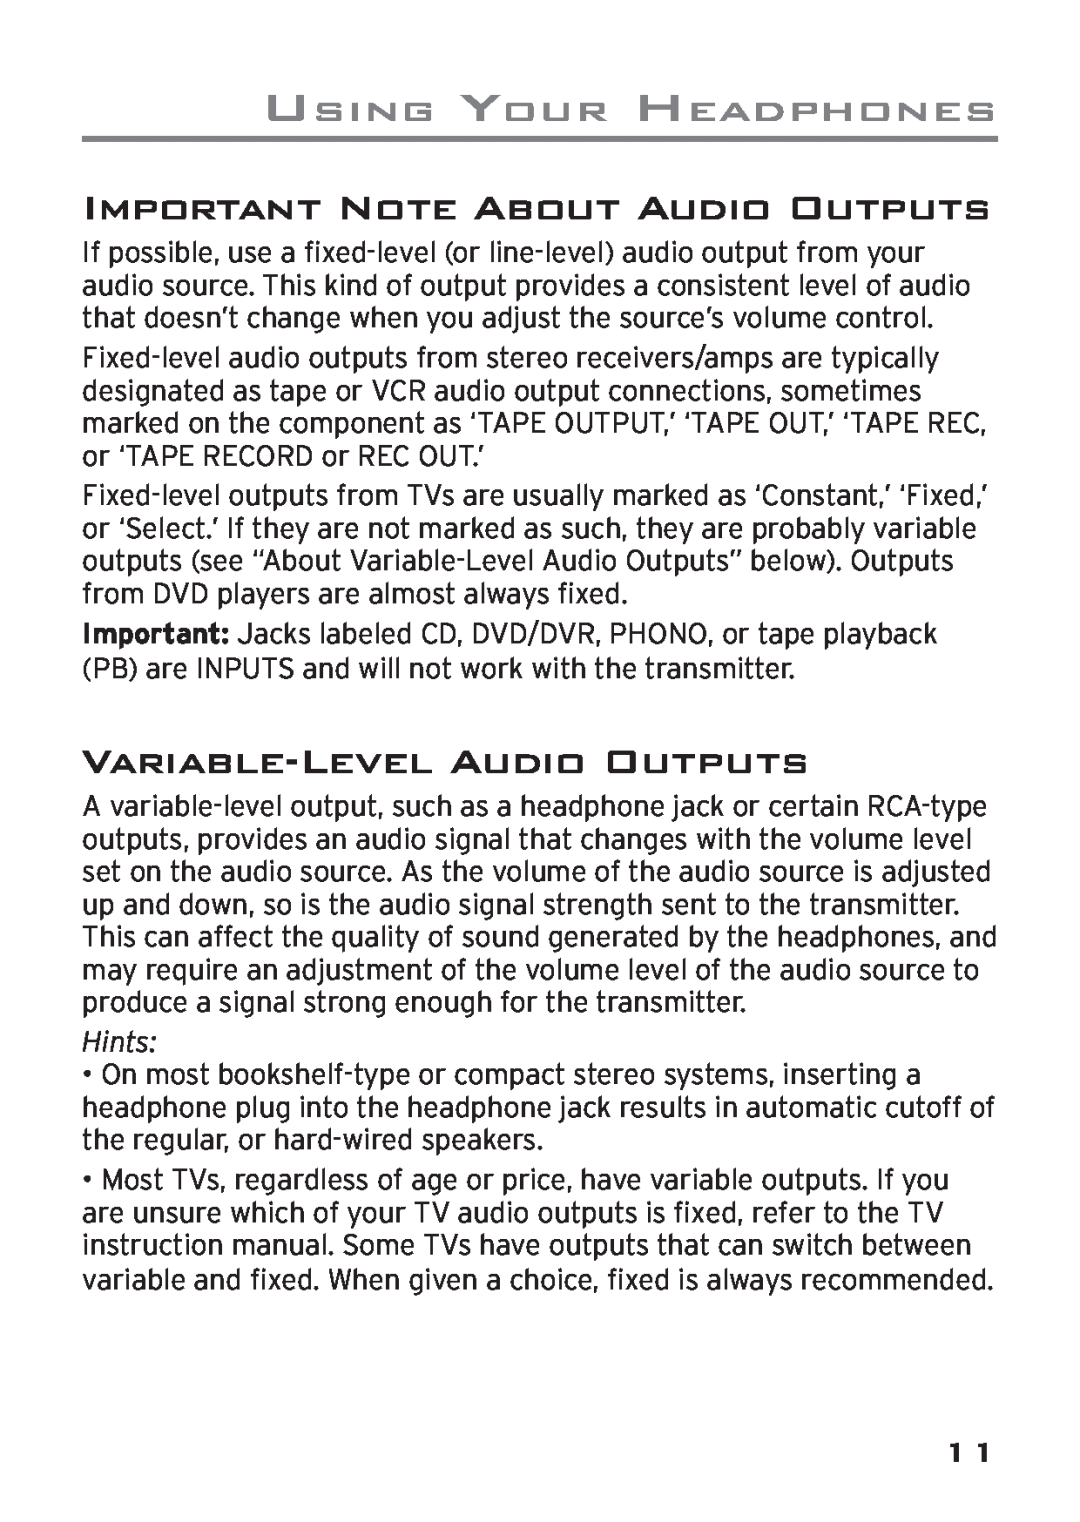 Acoustic Research AWD205 Important Note About Audio Outputs, Variable‑Level Audio Outputs, Using Your Headphones, Hints 